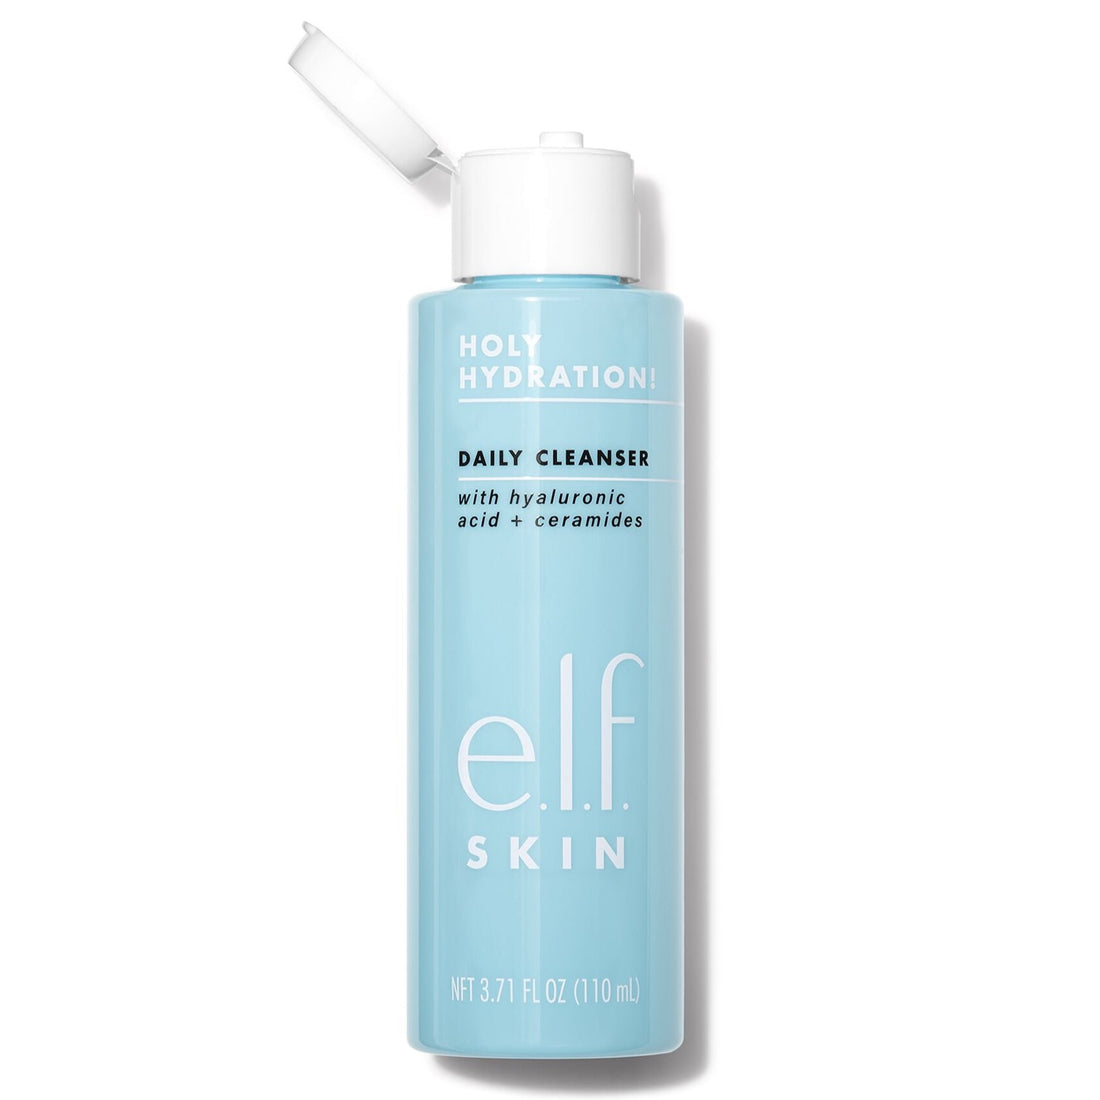 elf HOLY HYDRATION! Daily Cleanser, open bottle